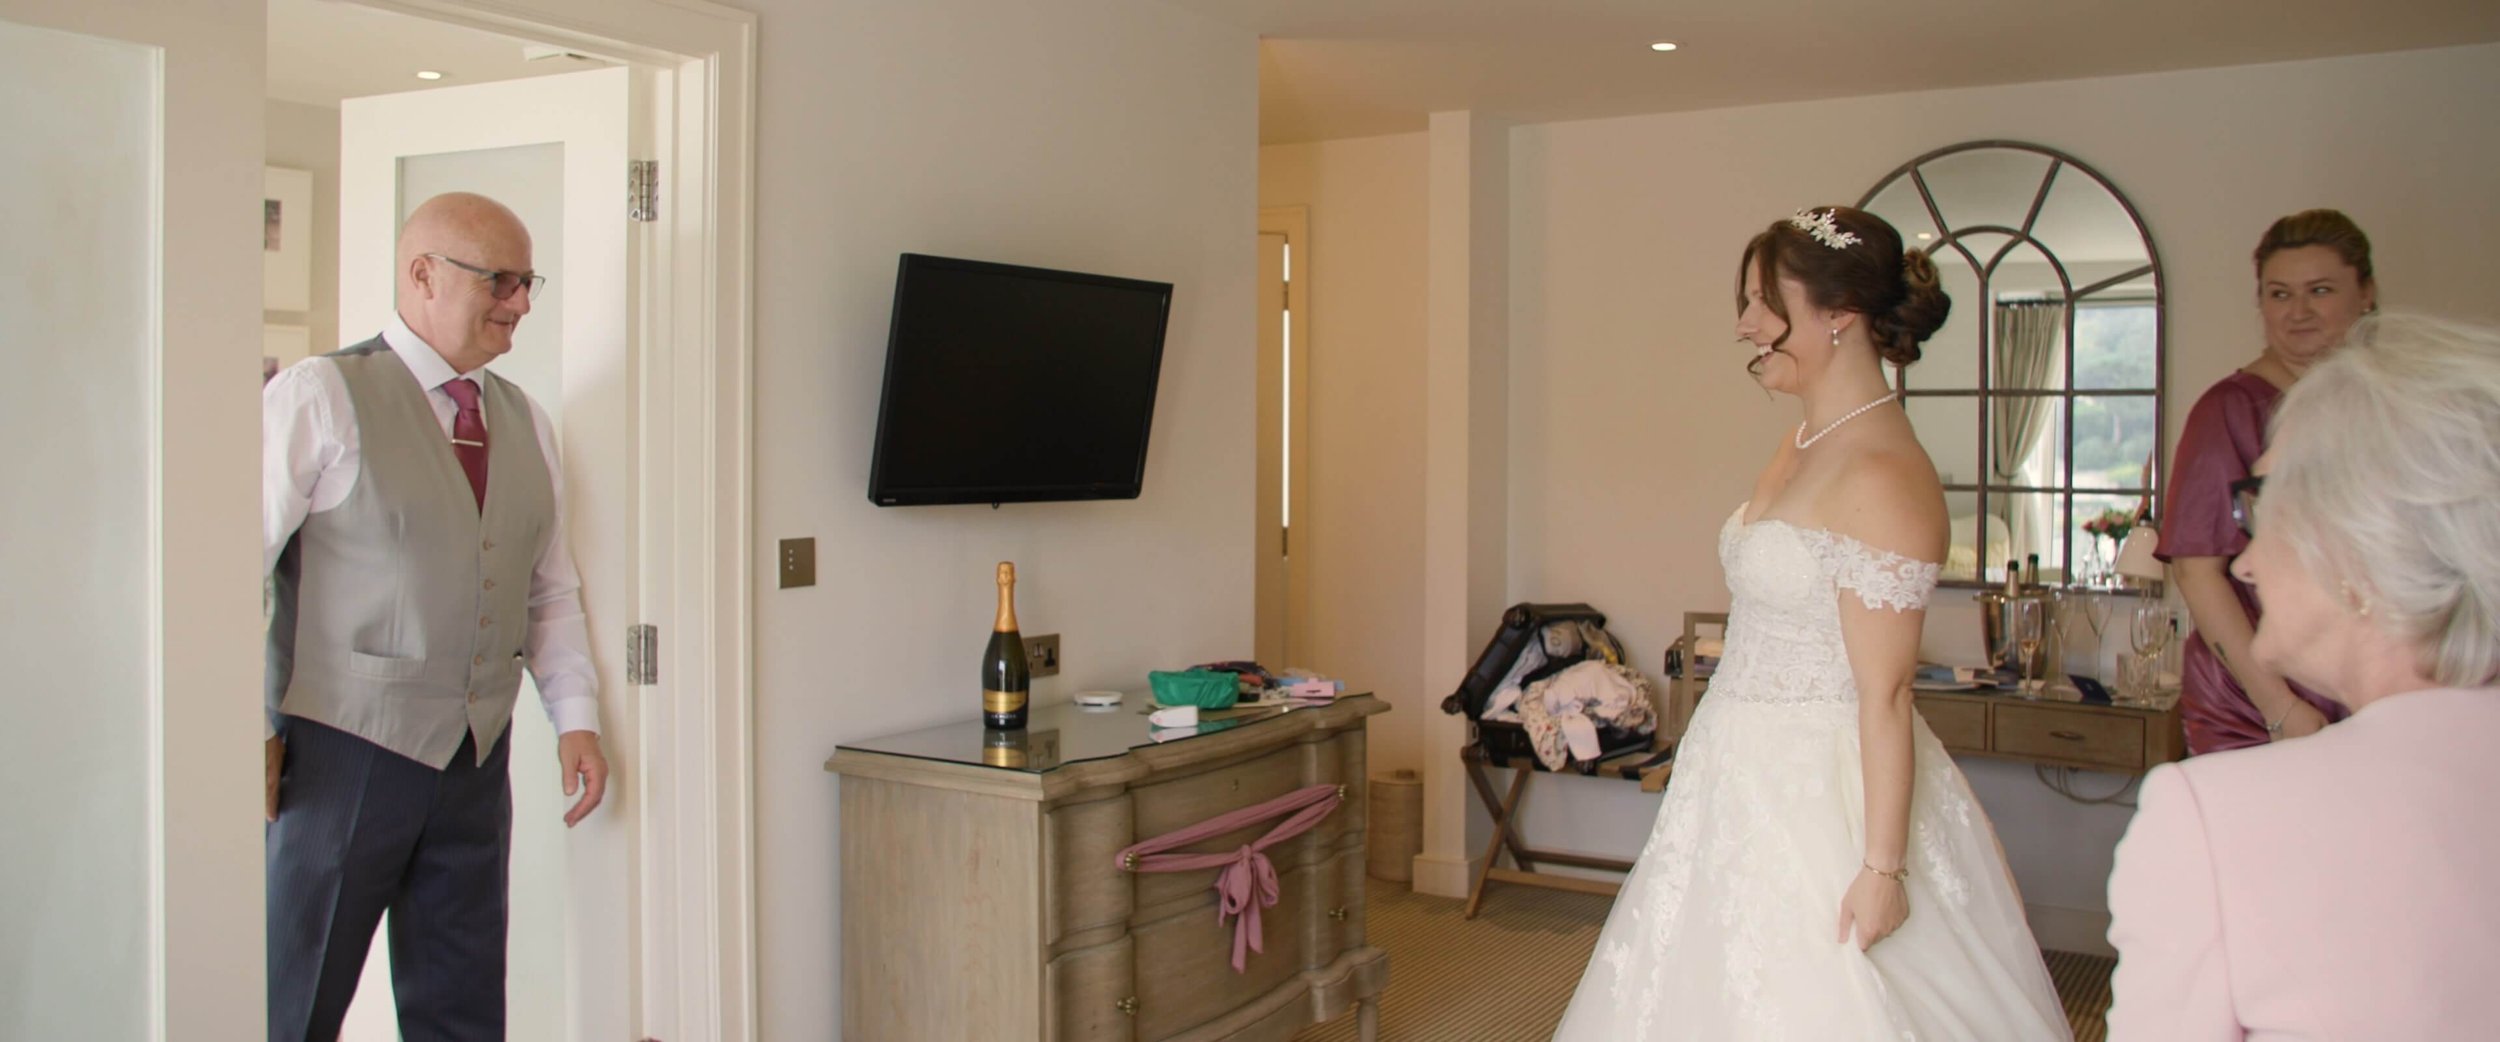 Amy's father sees her in wedding dress for the first time